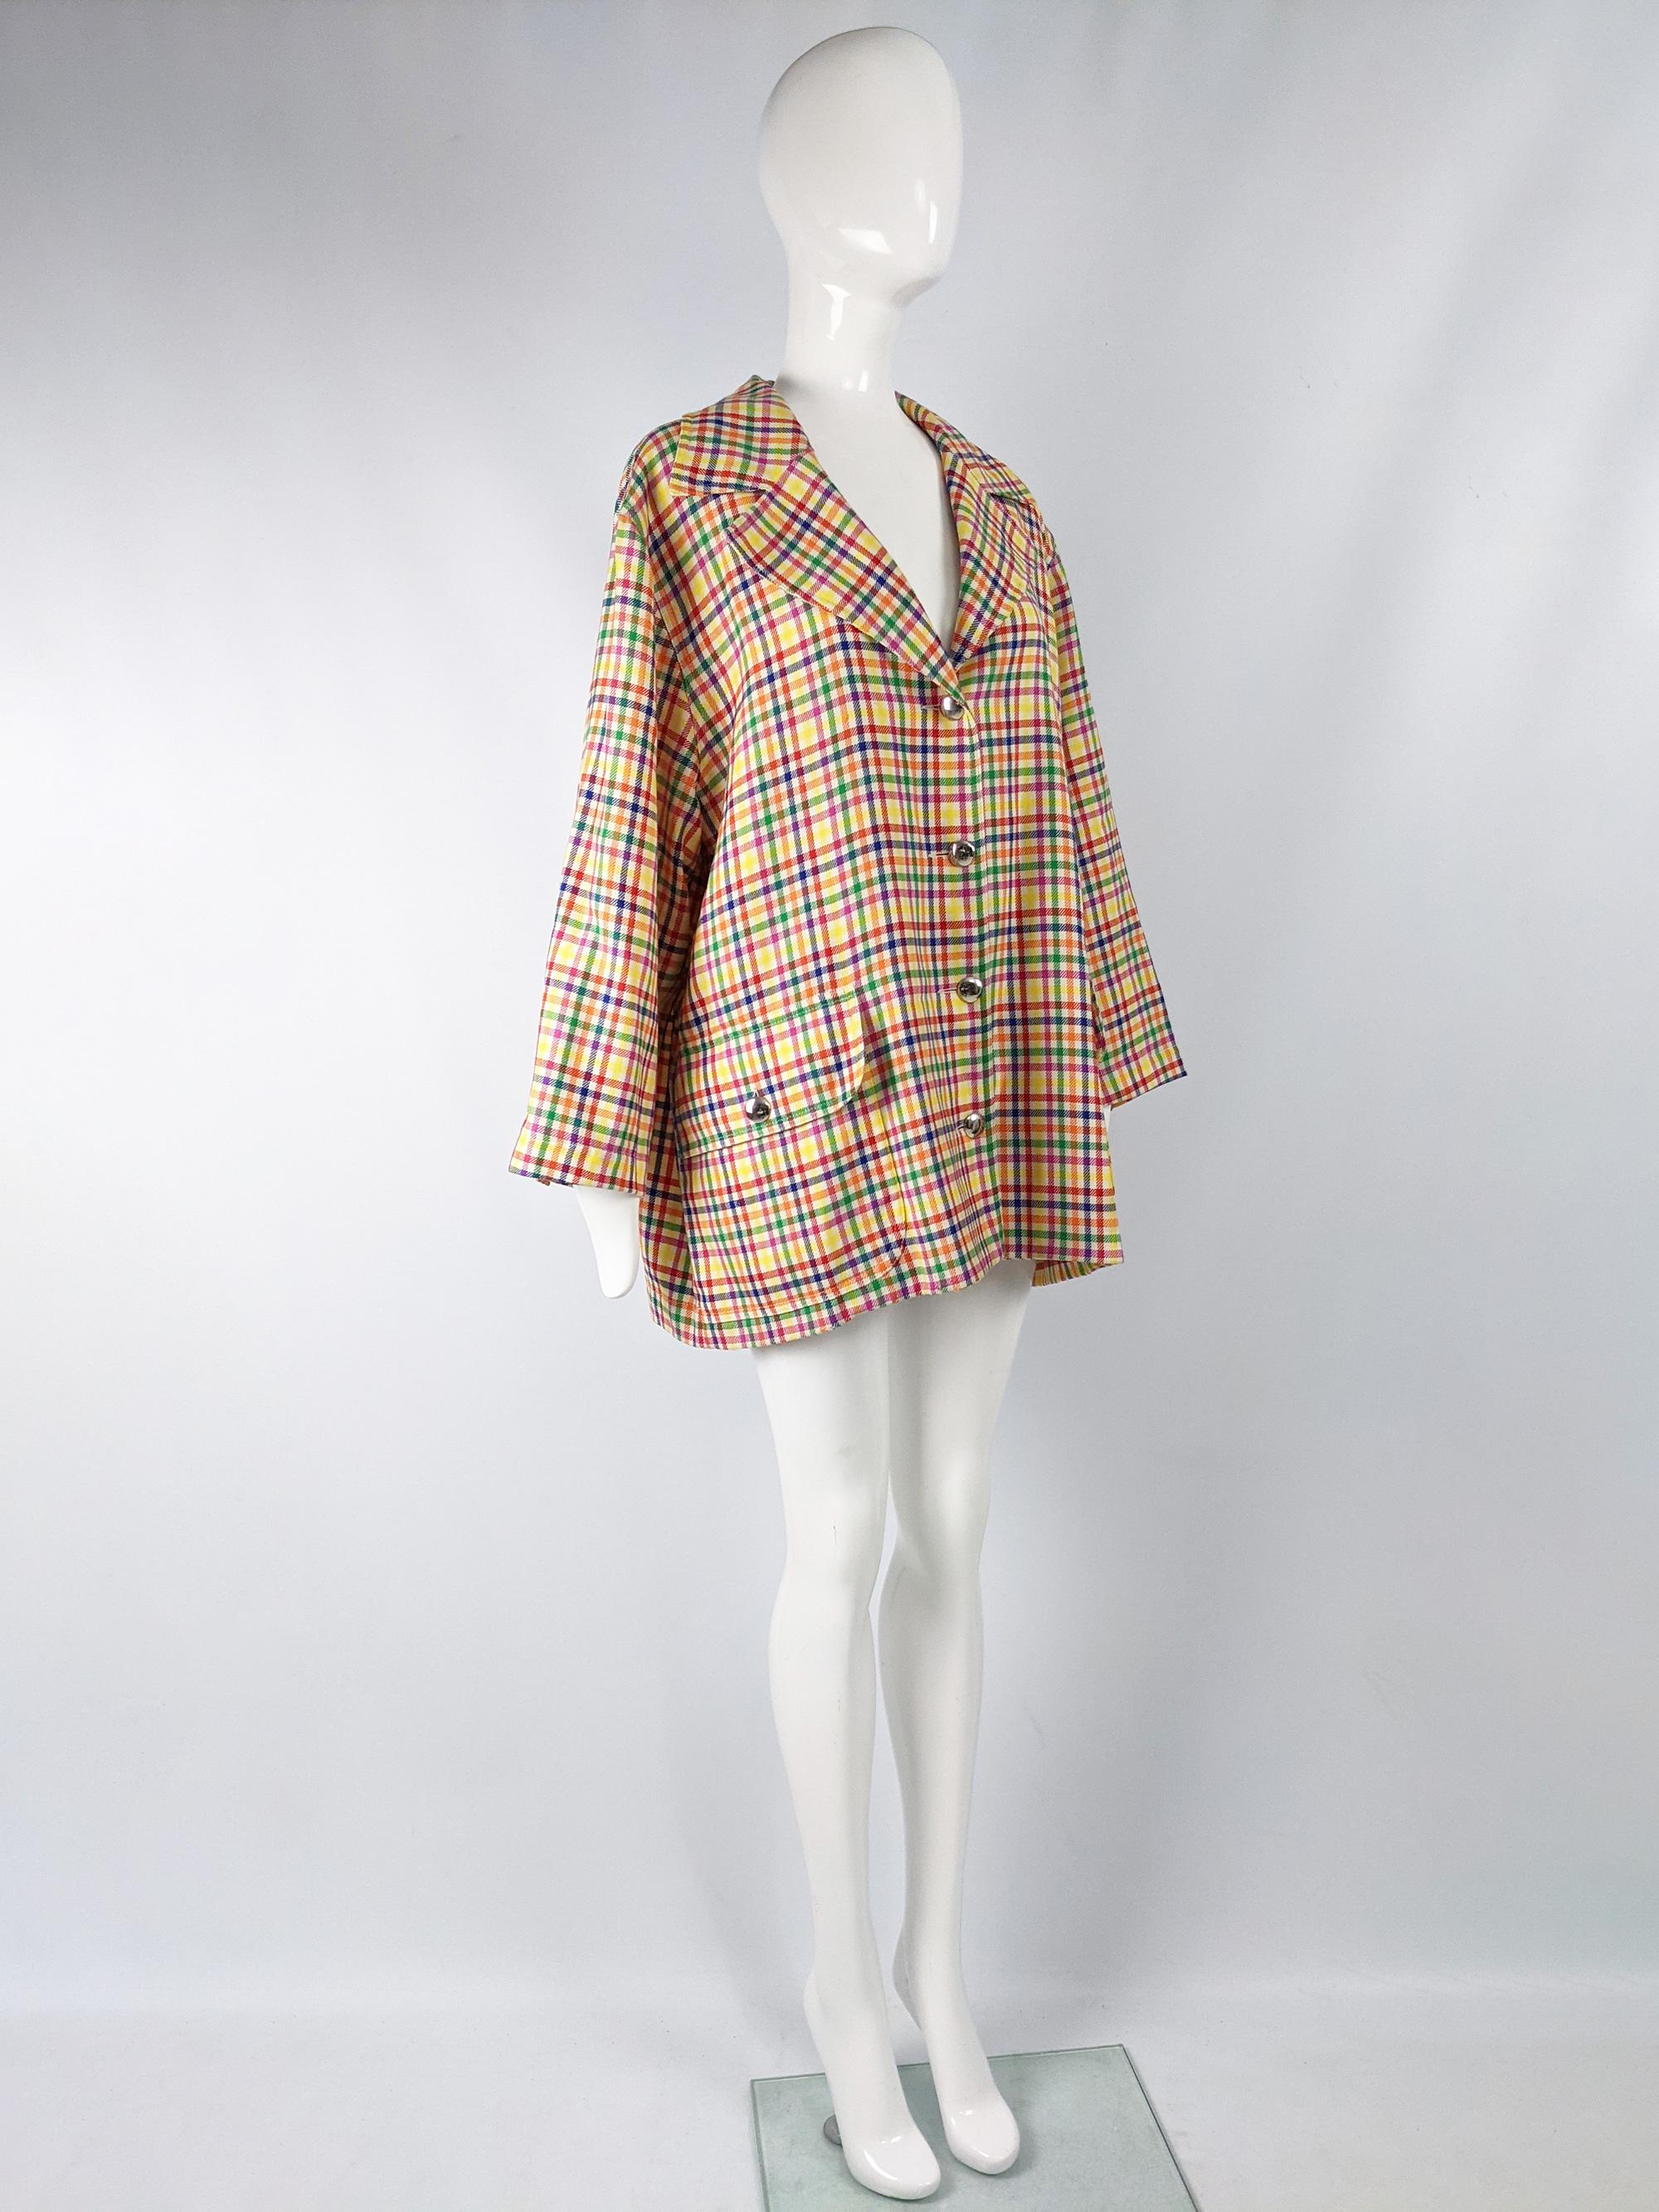 Women's Nina Ricci Vintage Oversized Wool Checked Coat, 1980s For Sale